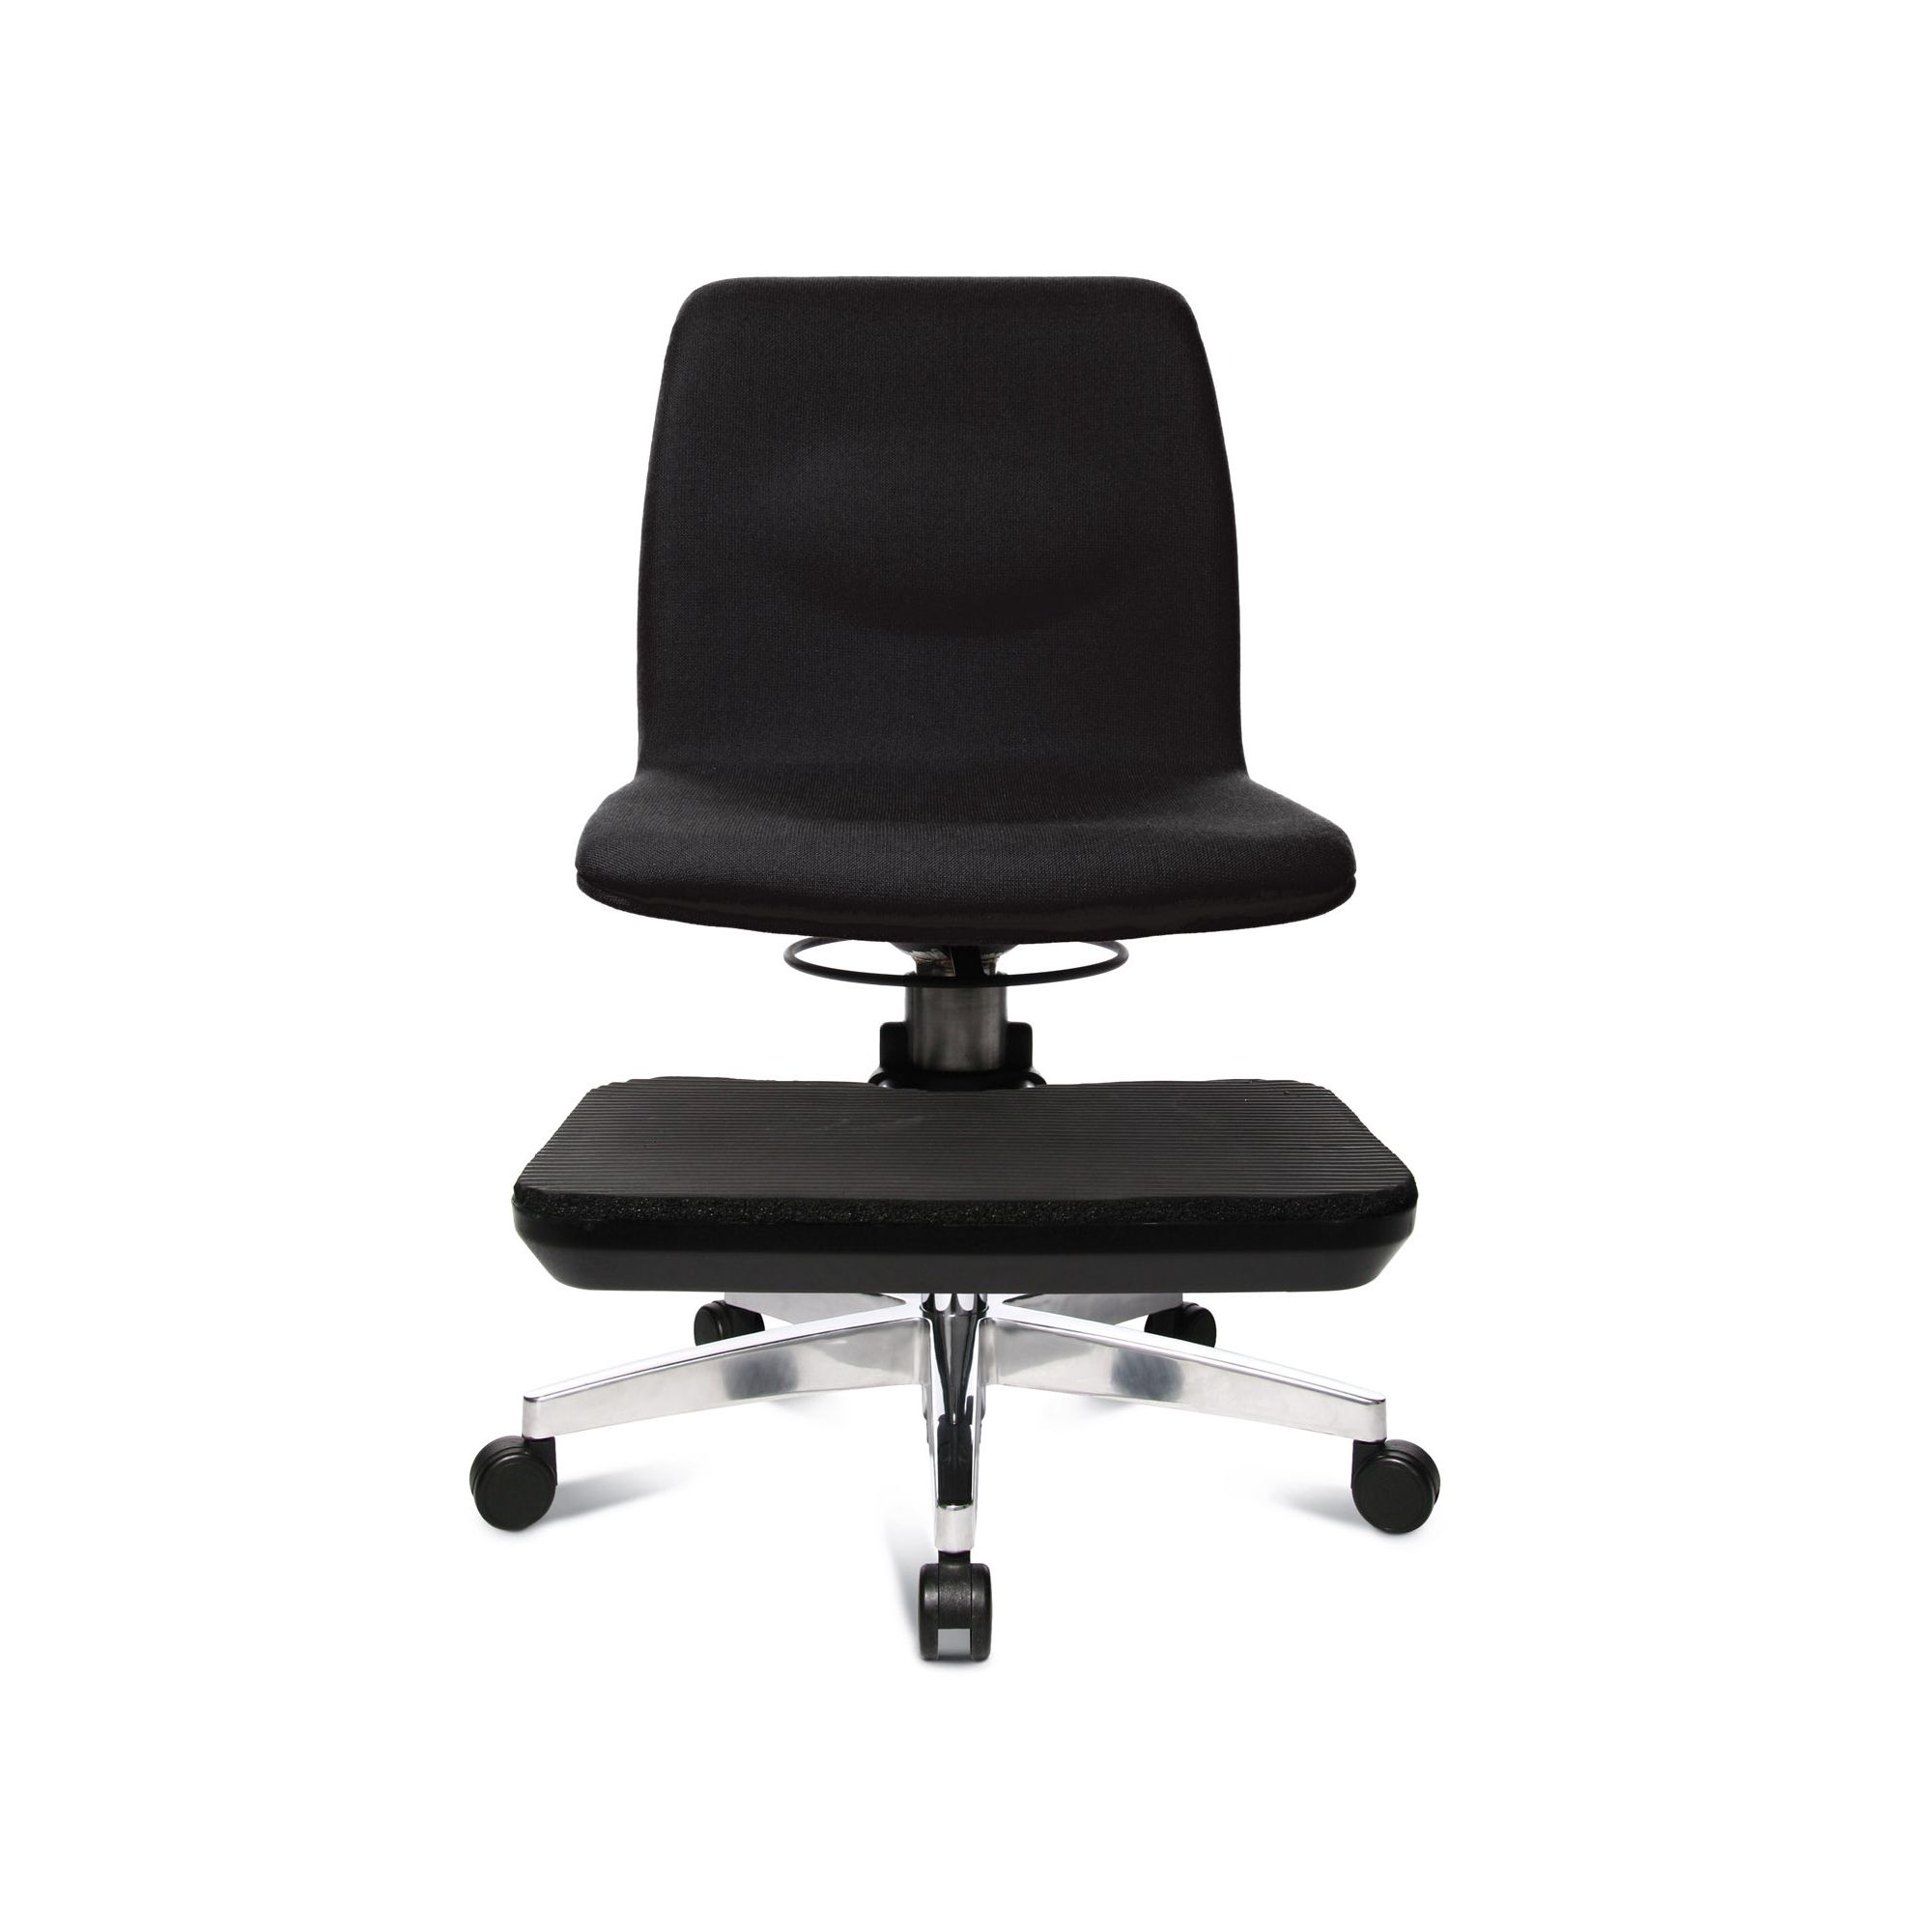 Topstar Sitness 200 Swivel Chair in Black at Tesco Direct